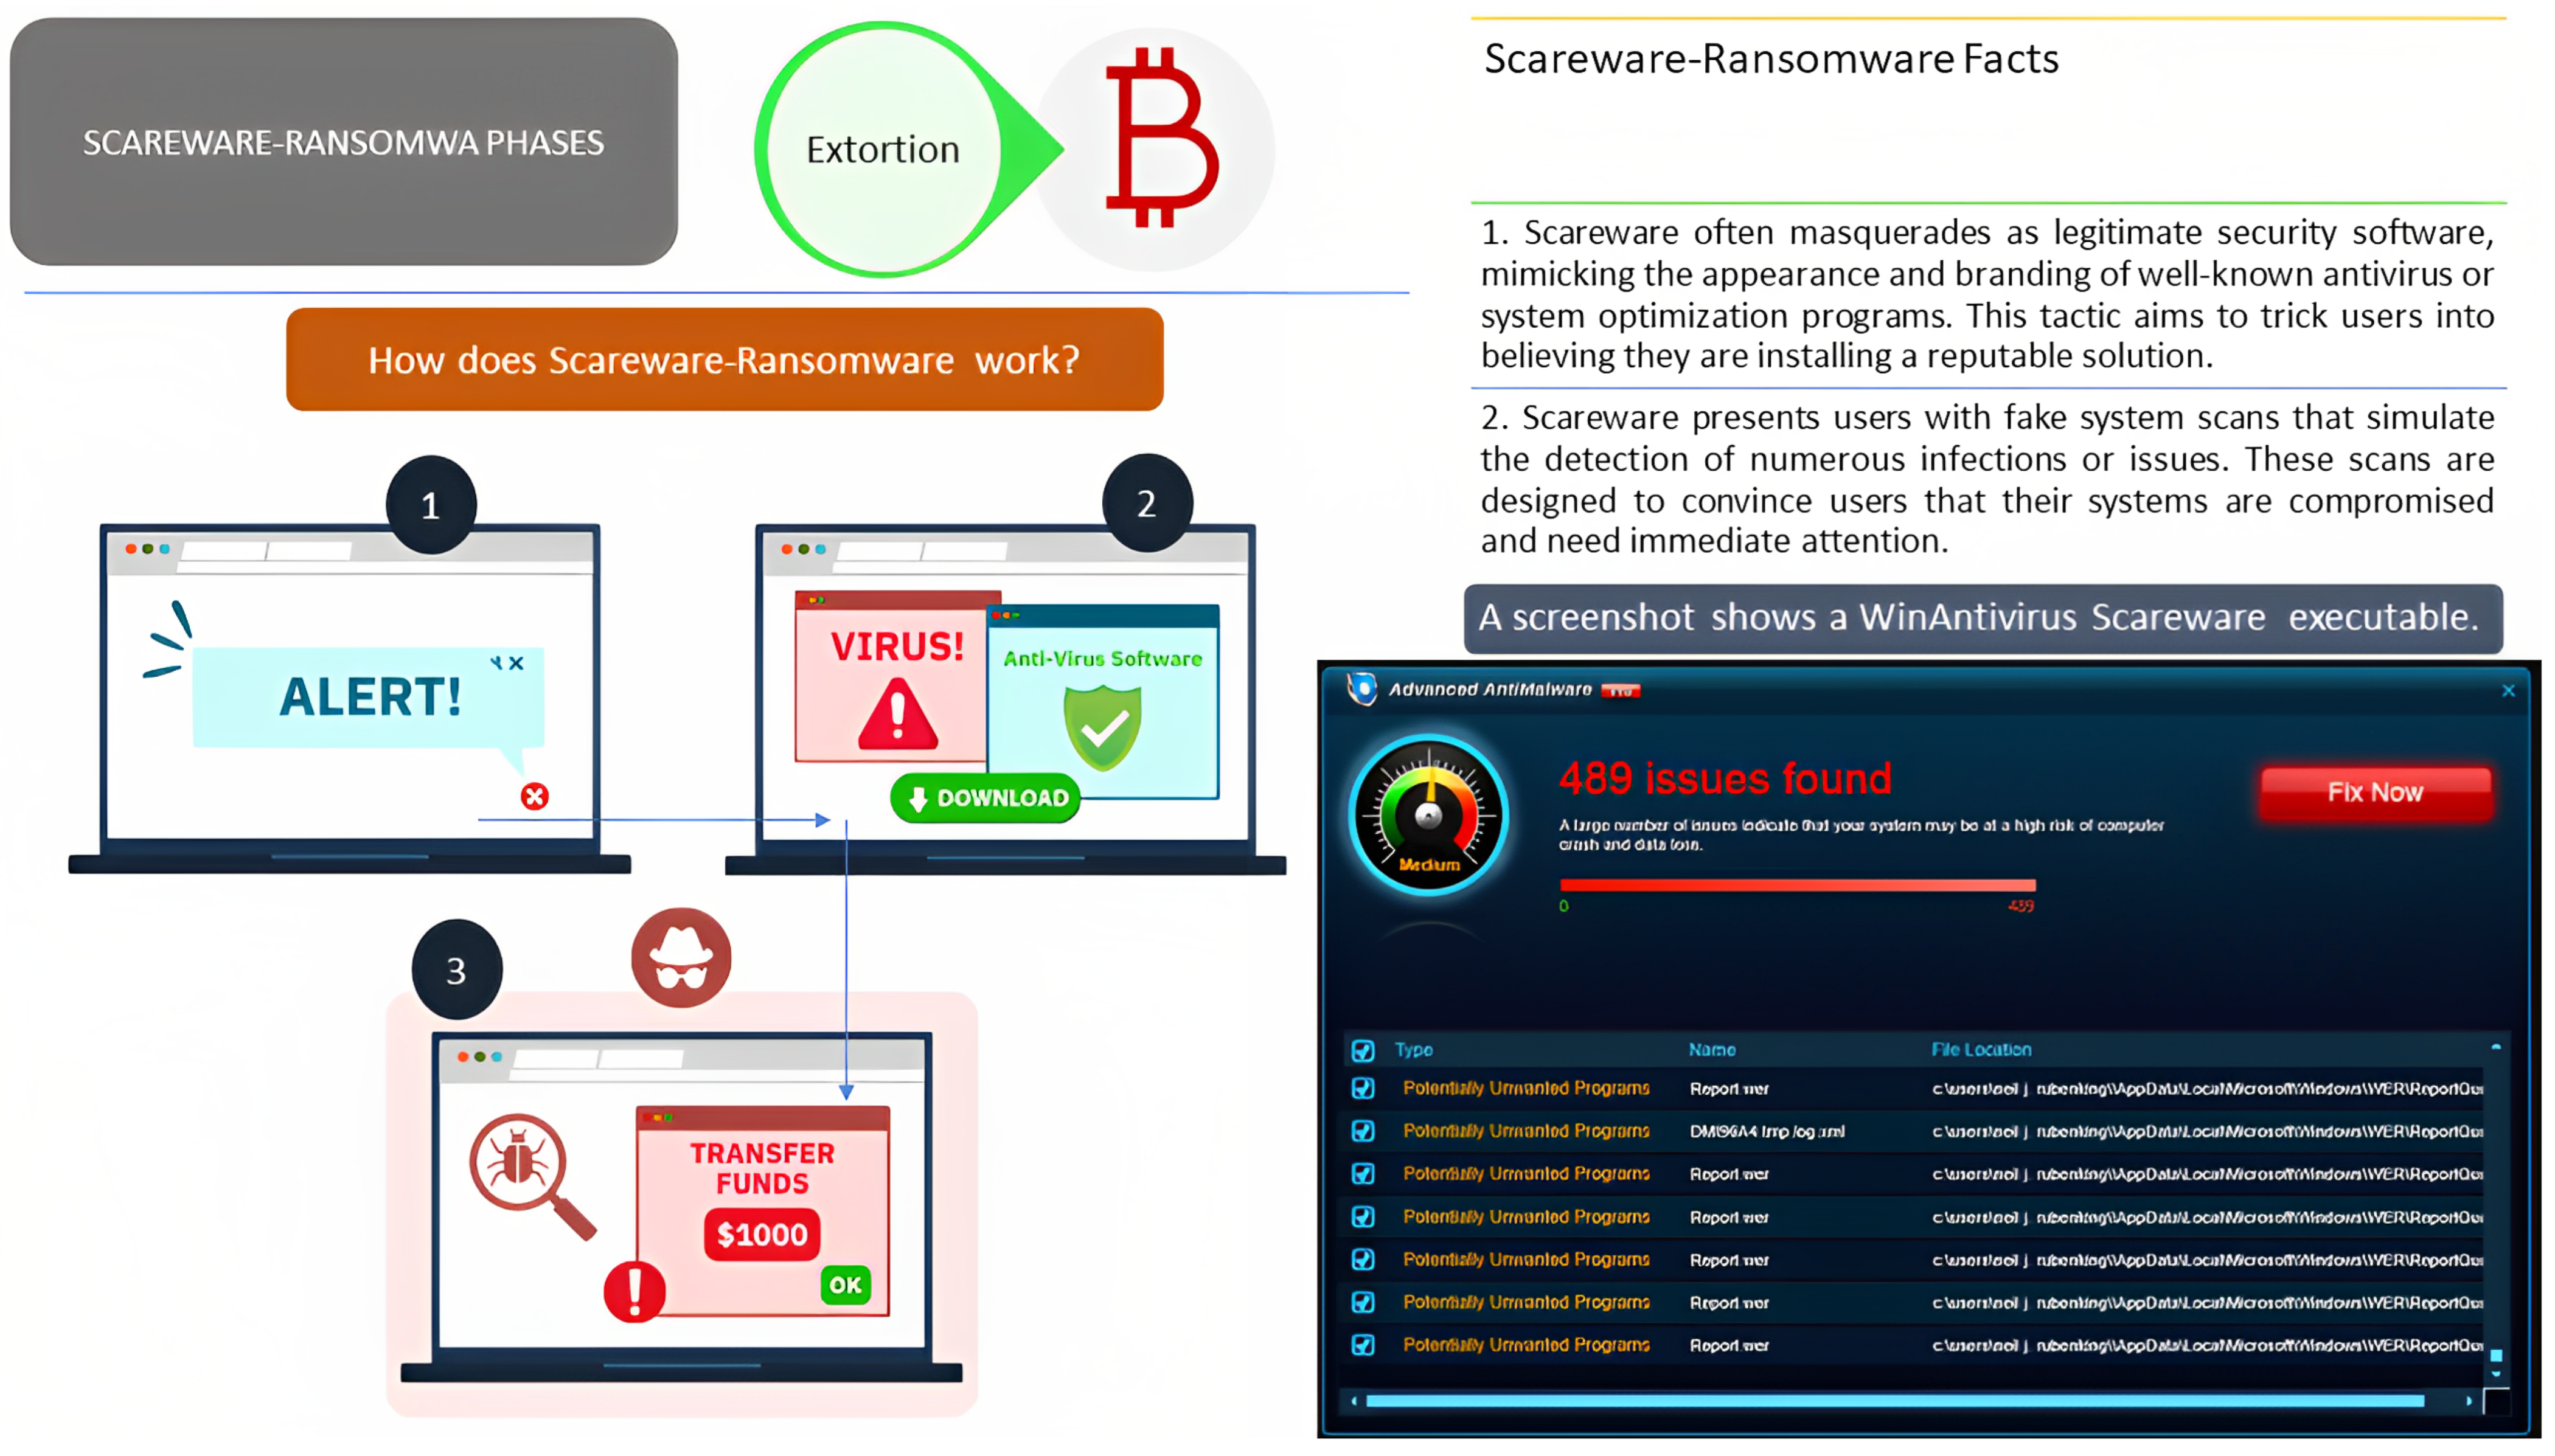 New Ransomware Strain Evades Detection by All but One Antivirus Engine